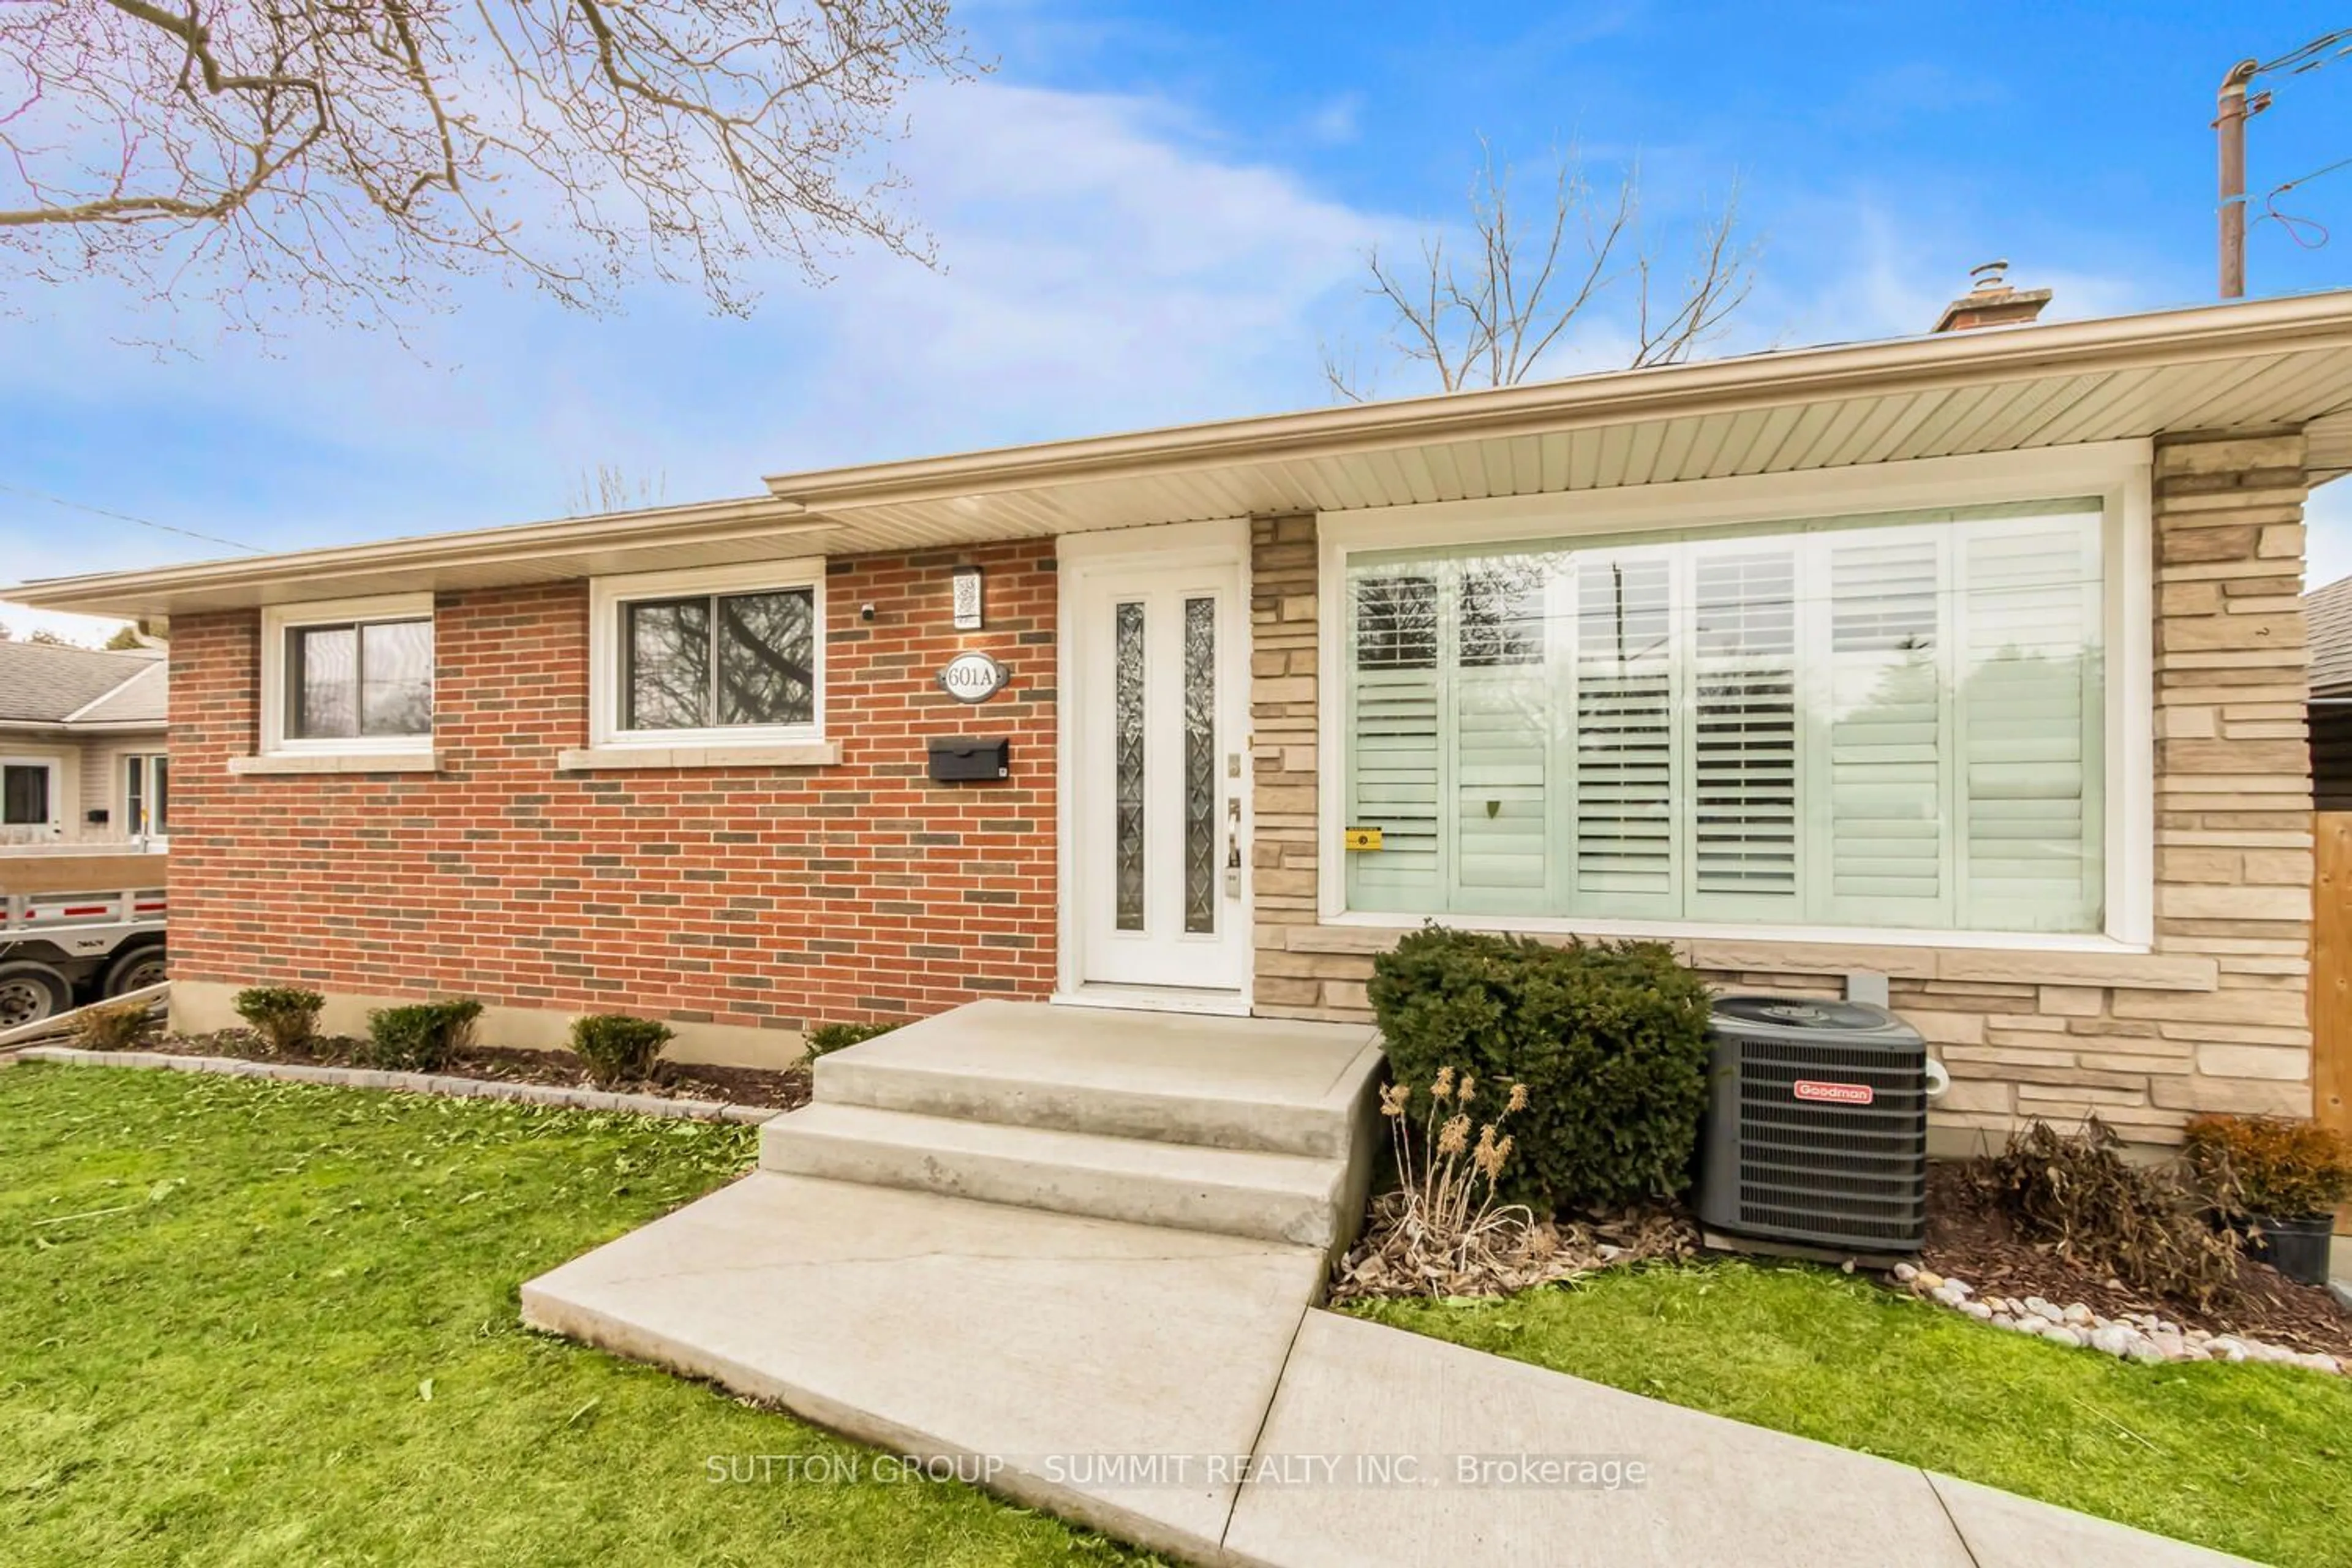 Home with brick exterior material for 601 Geneva St, St. Catharines Ontario L2N 2J3